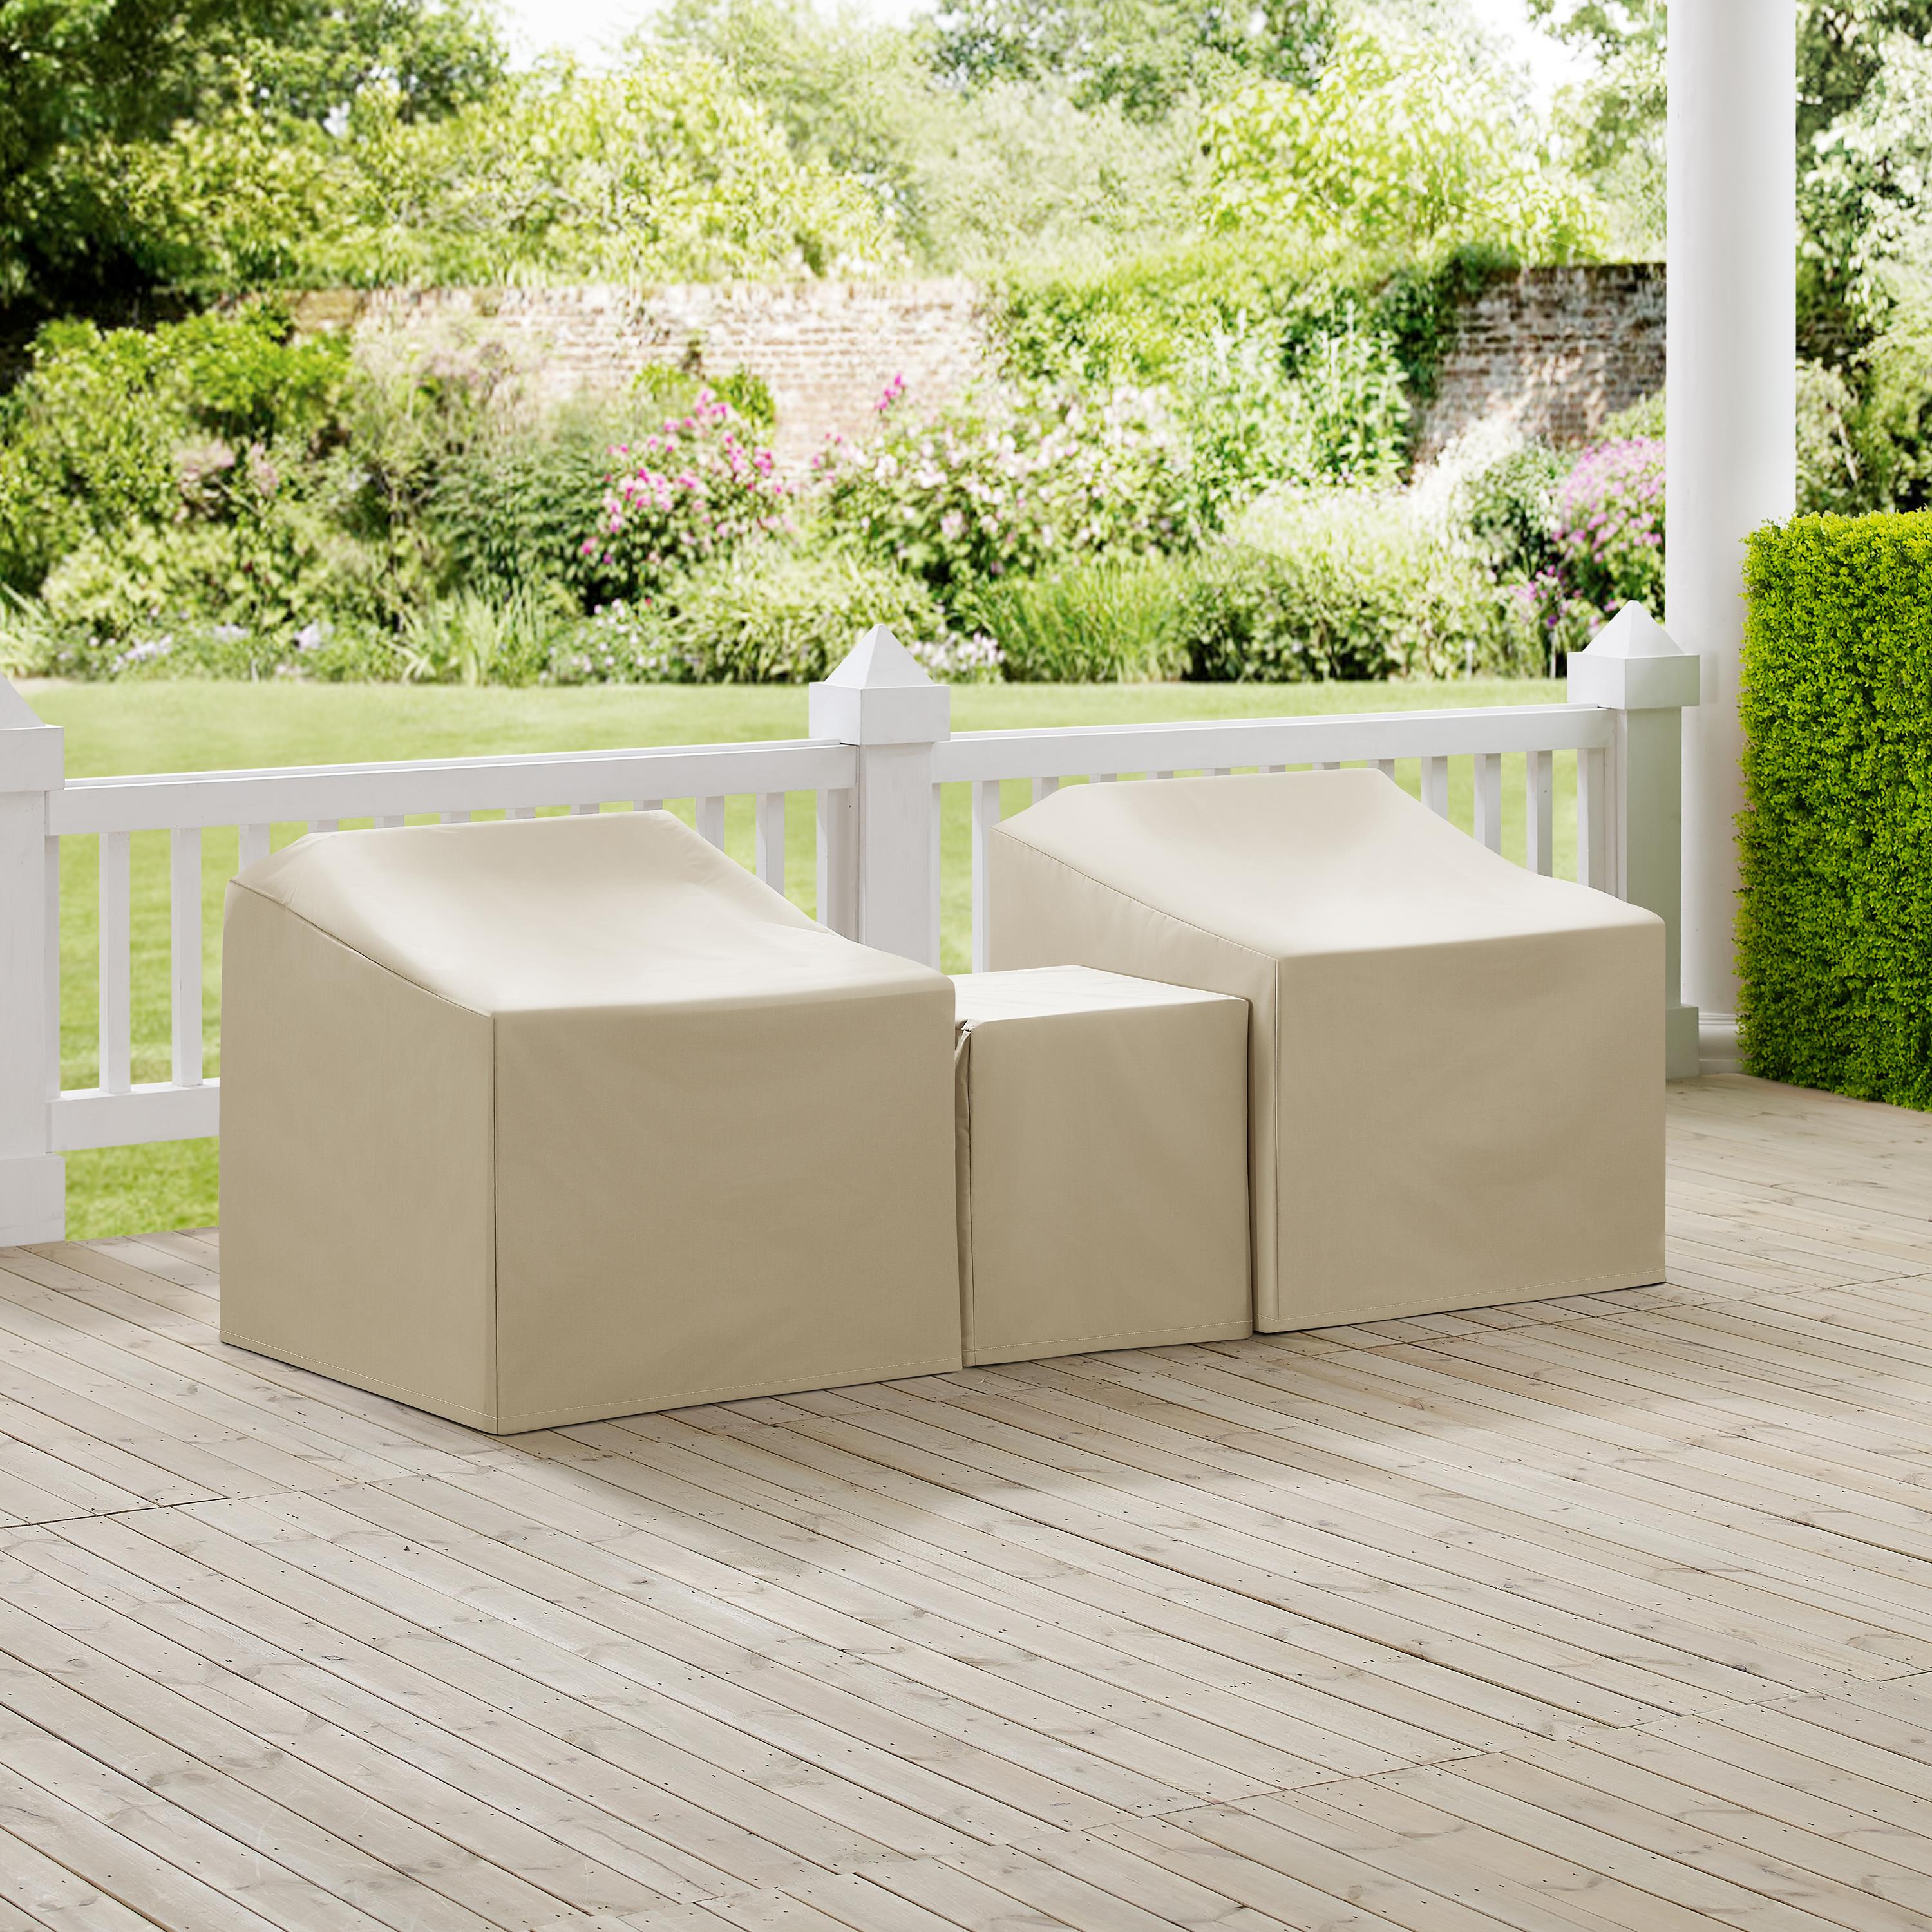 3Pc Furniture Cover Set - image 4 of 7